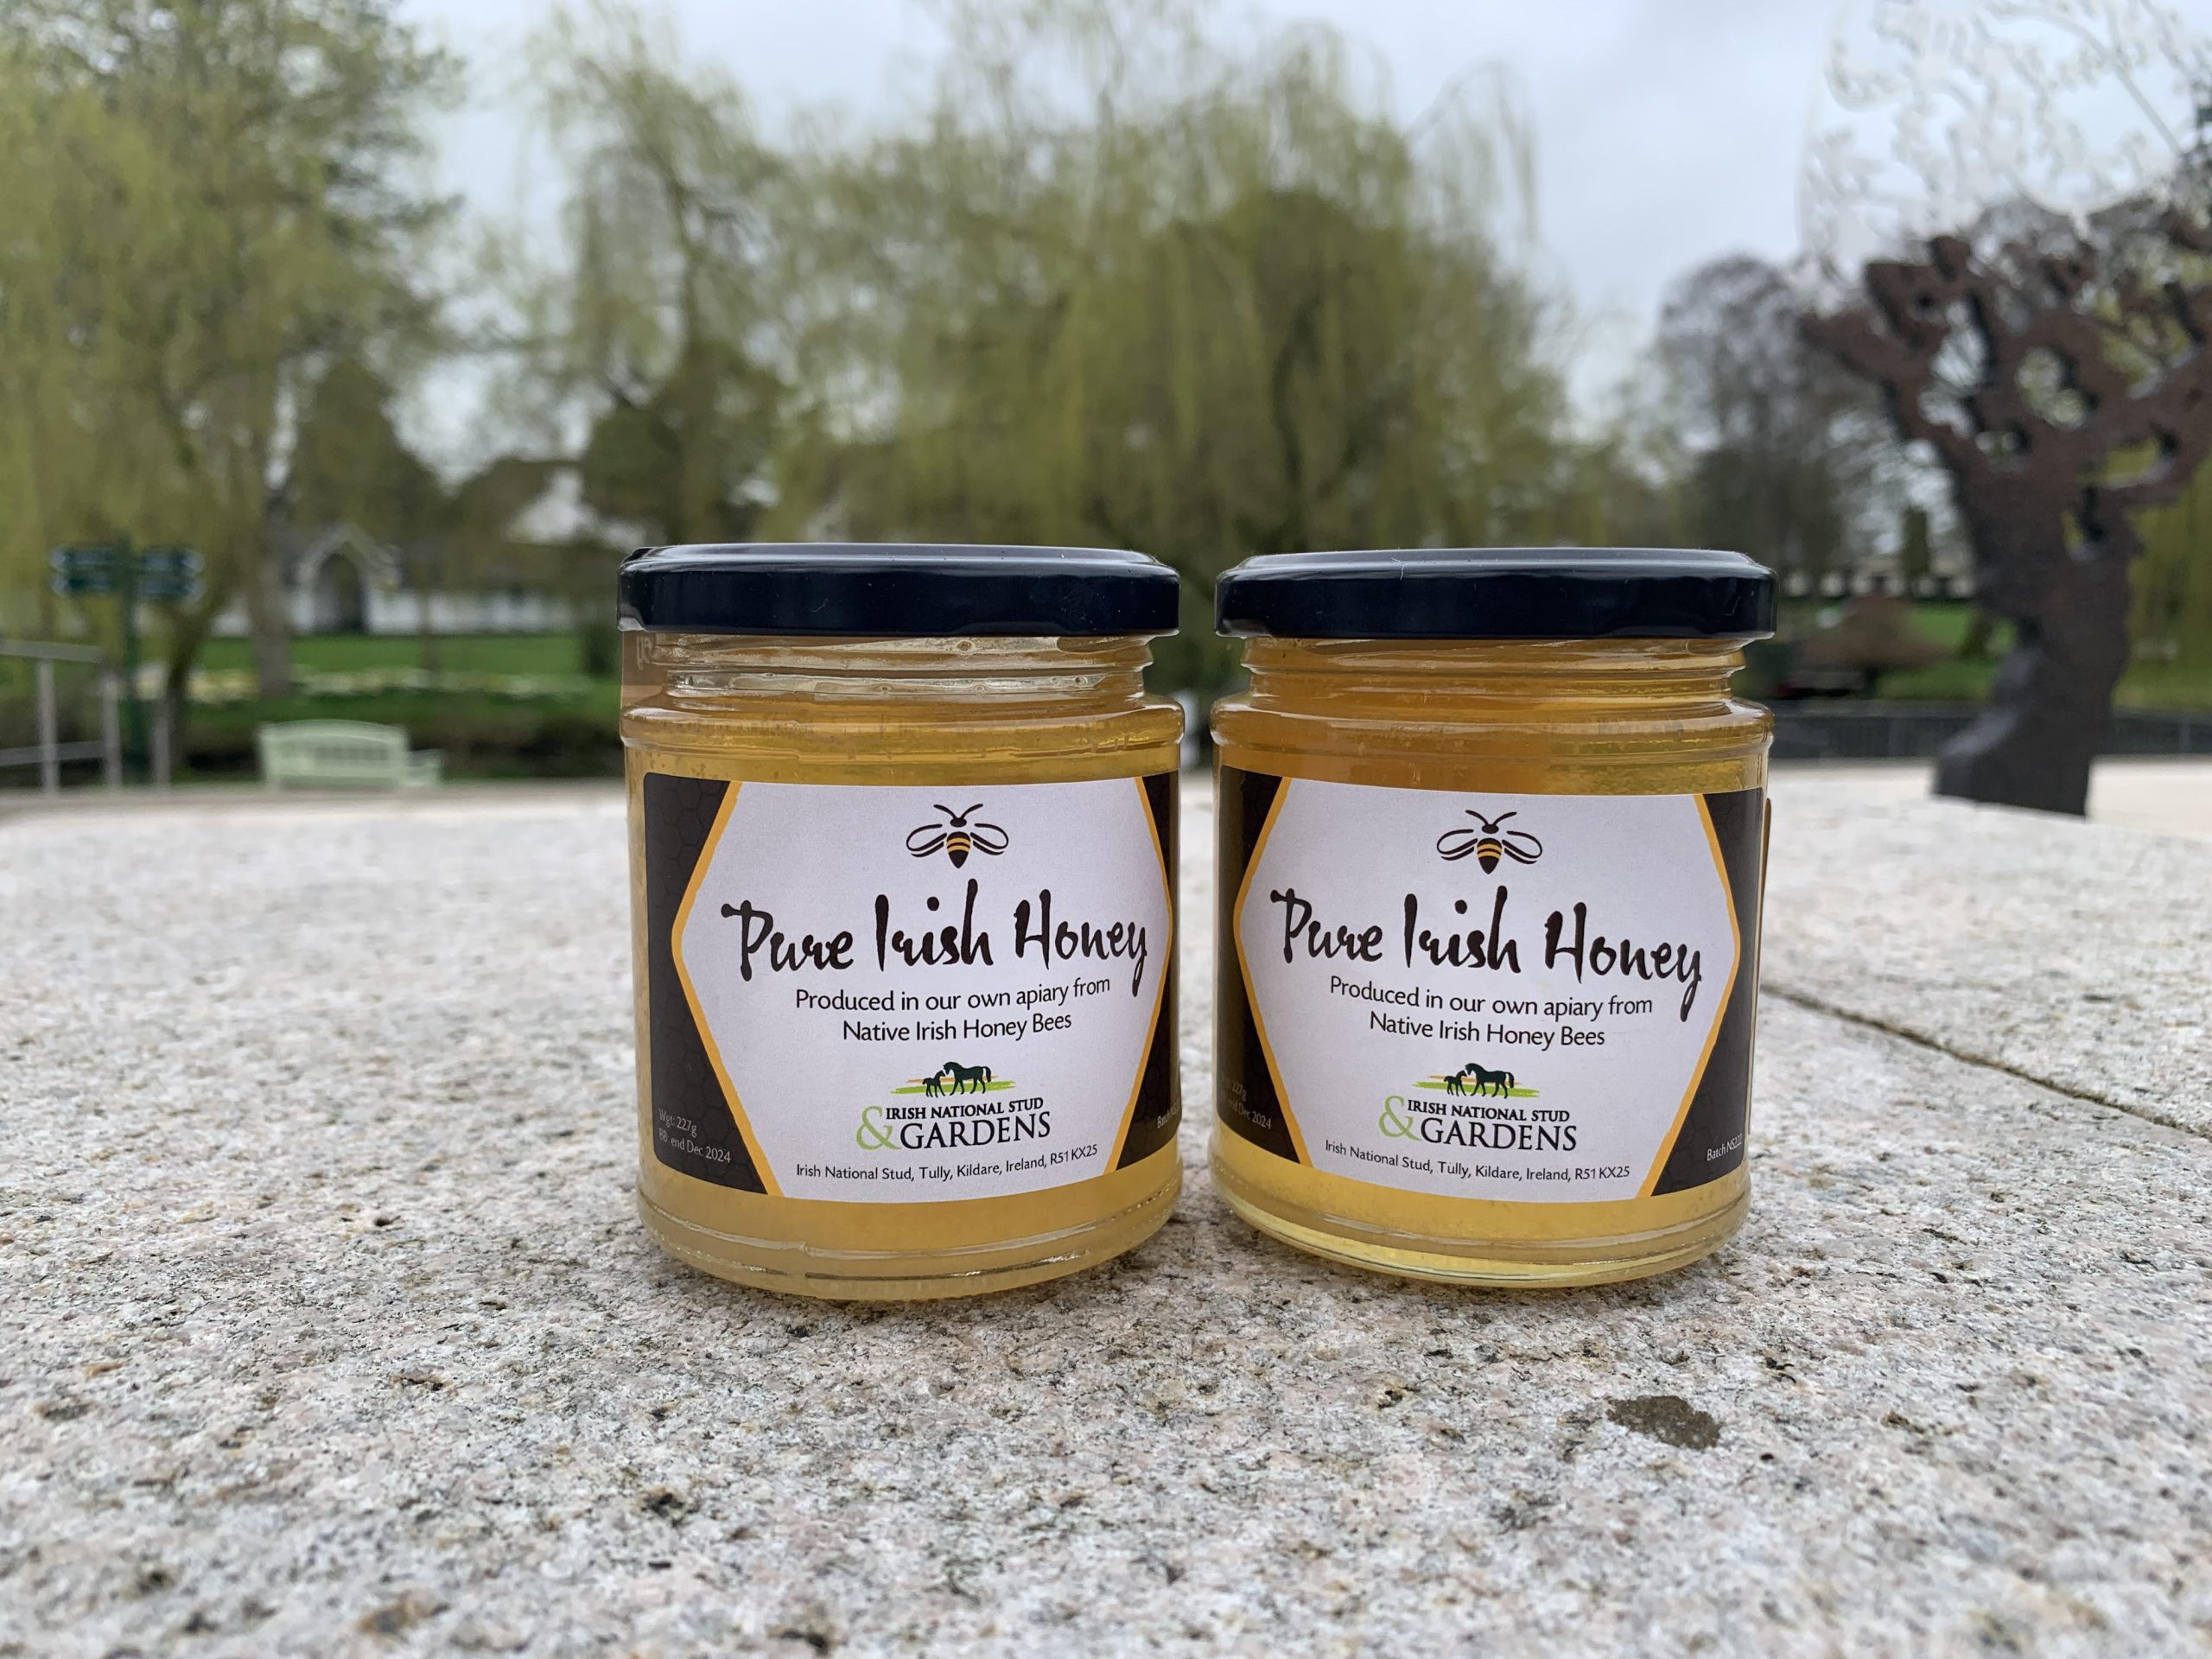 Buzzing with Flavor: The Story of Our 100% Pure Irish Honey